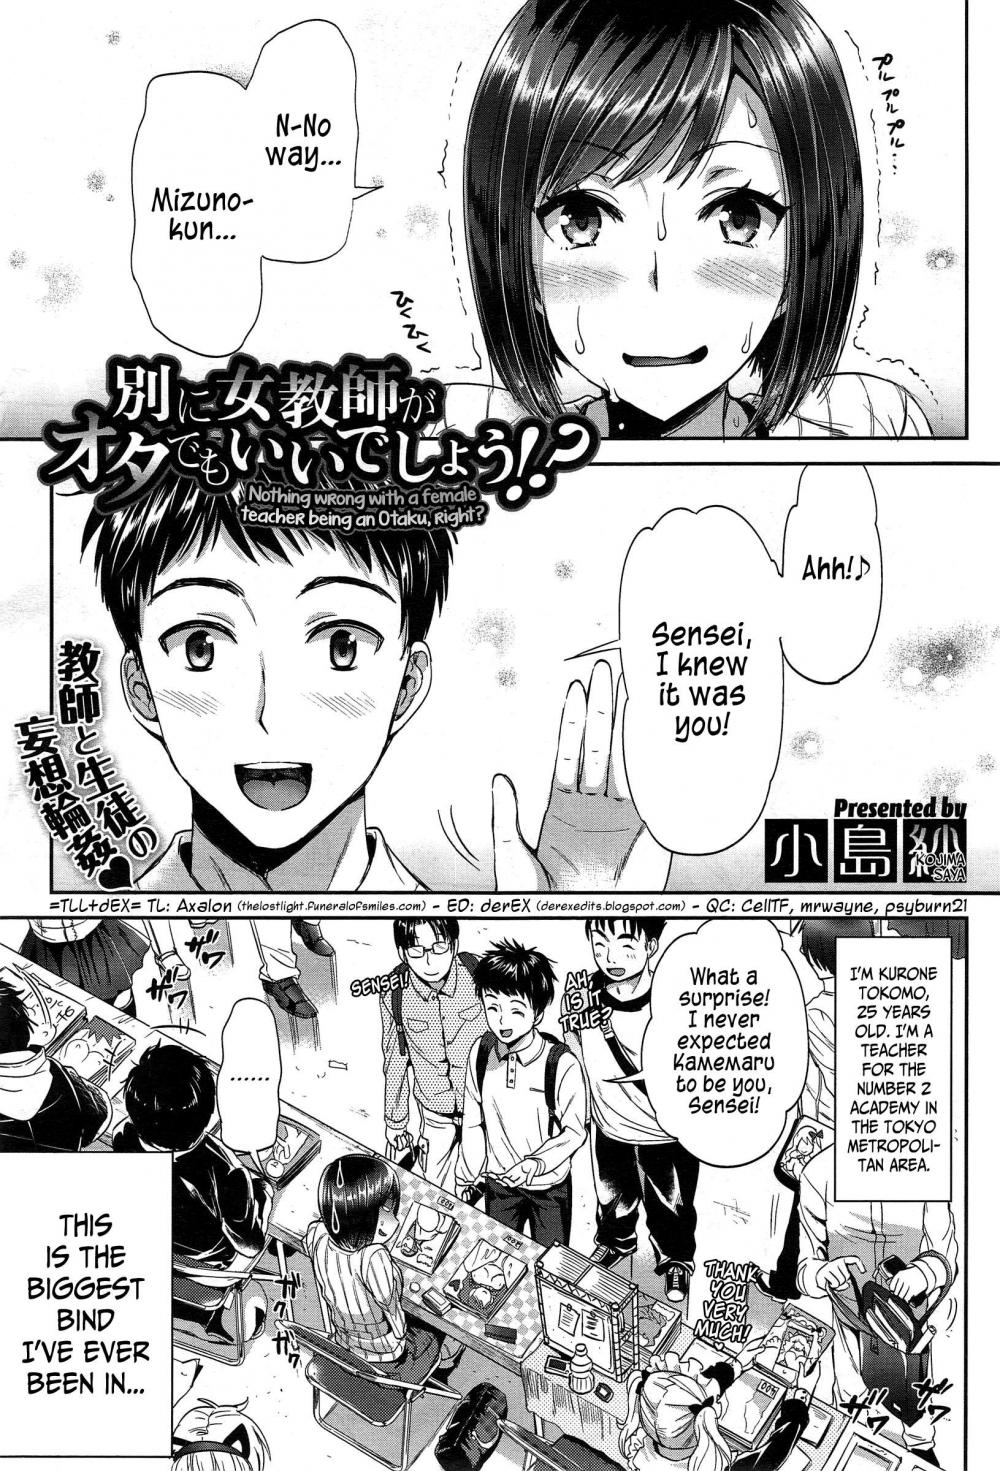 Hentai Manga Comic-Nothing Wrong With A Female Teacher Being An Otaku, Right!?-Read-1